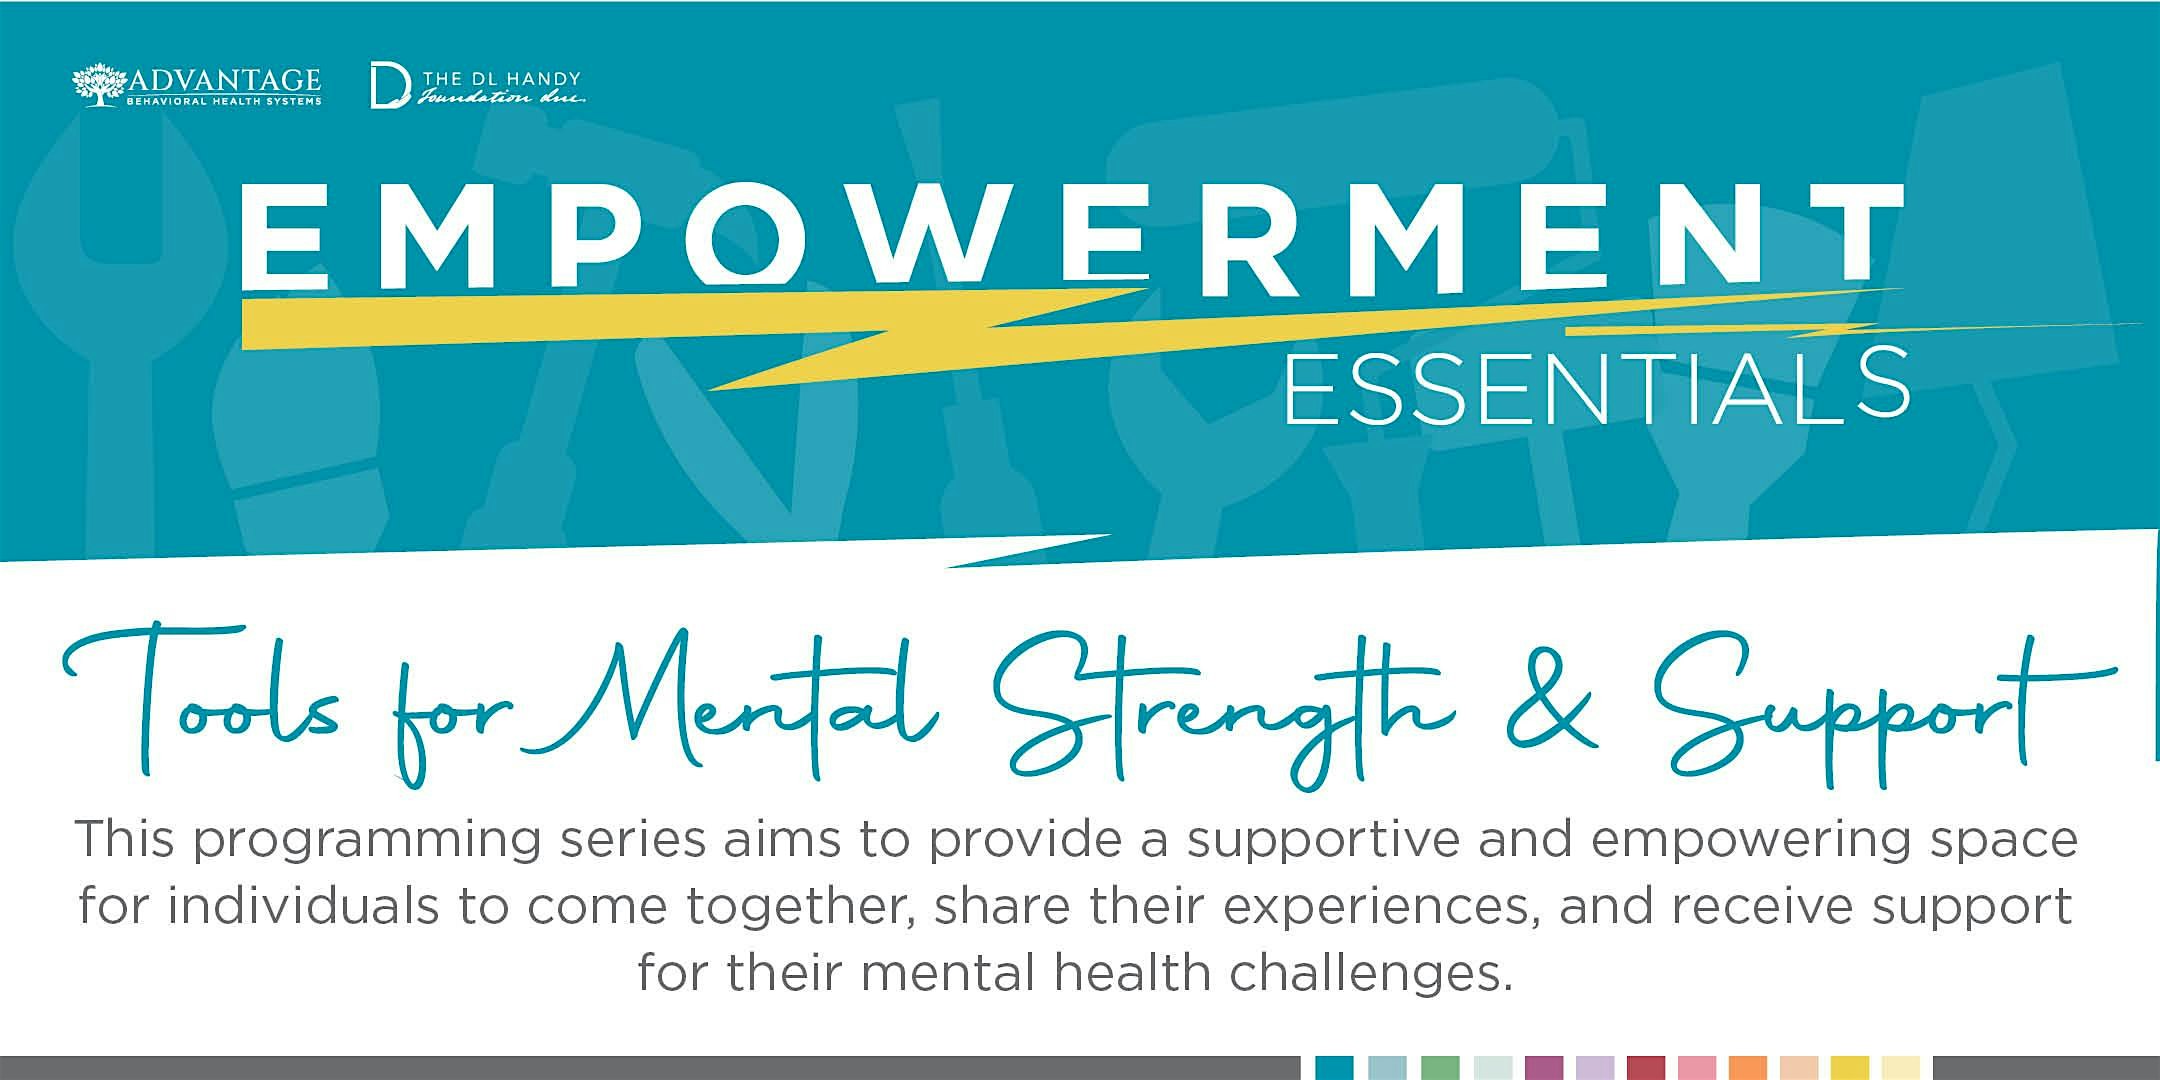 "Mental Health Crisis Management: Strategies and Support\u201d